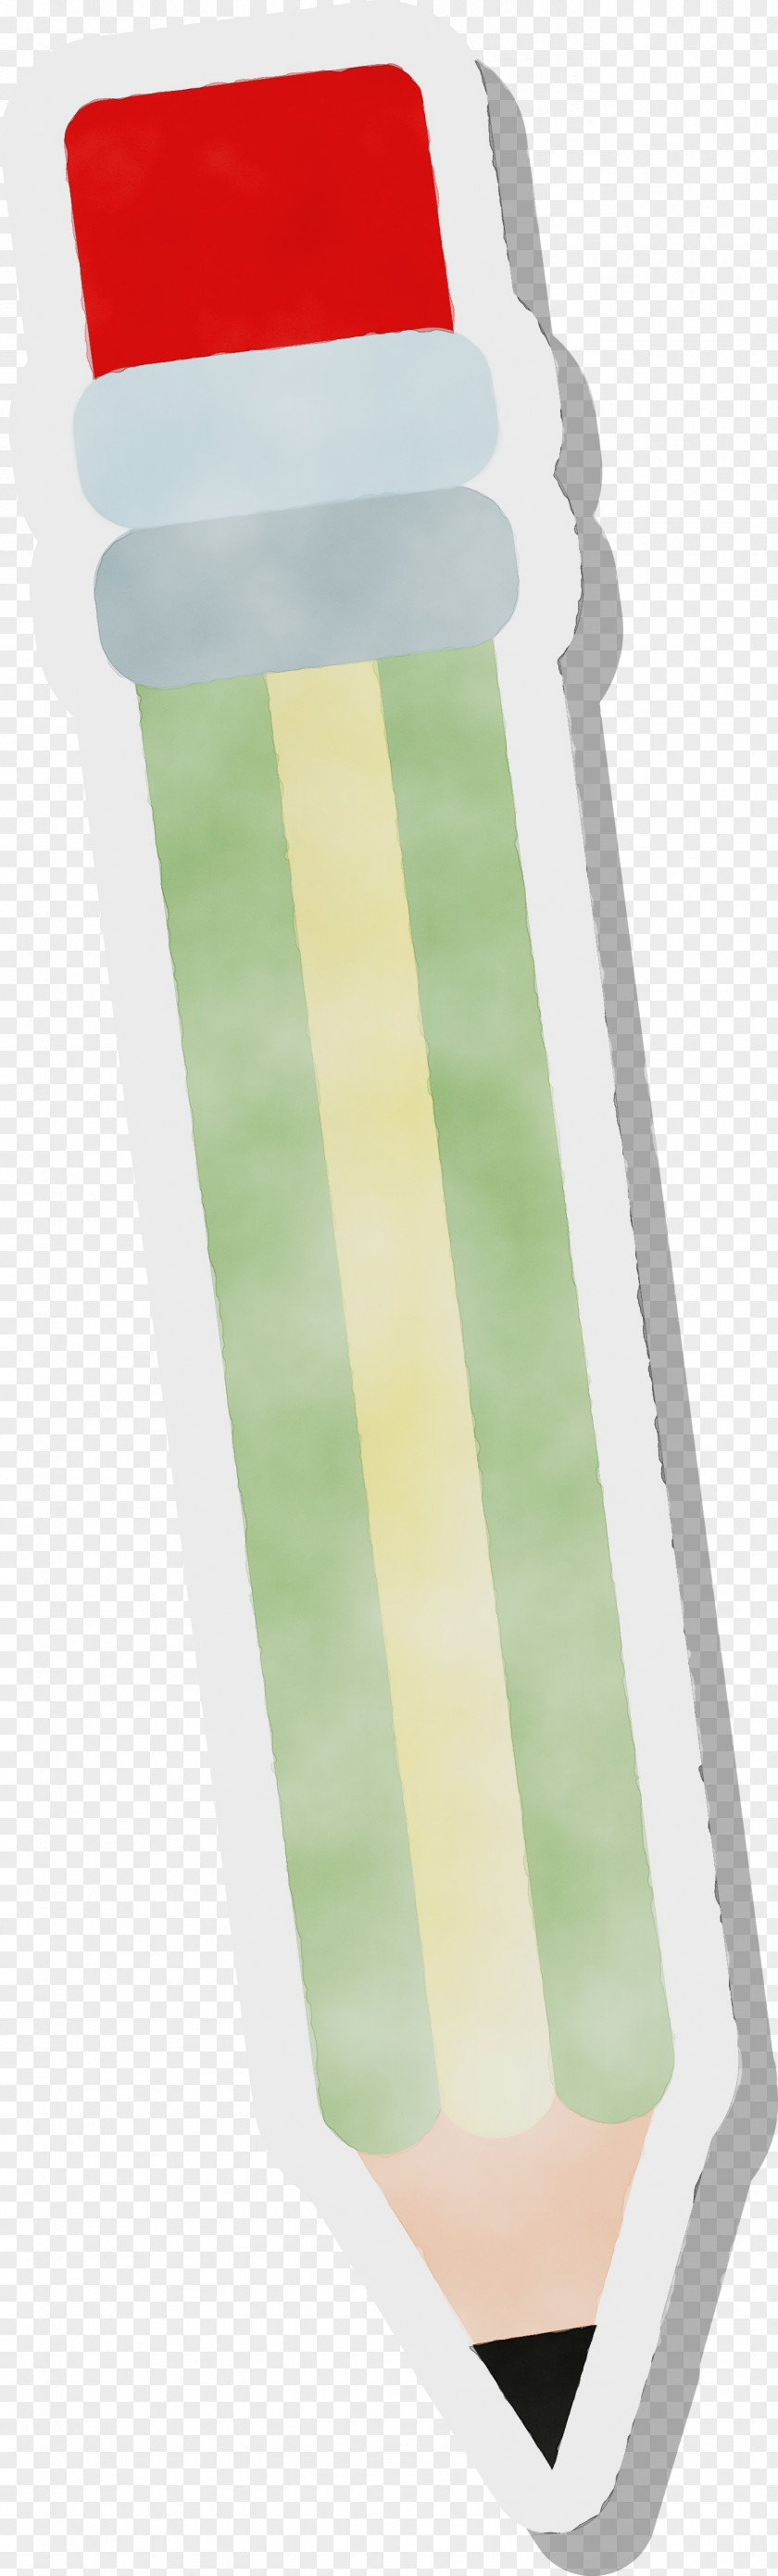 Green Rectangle PNG